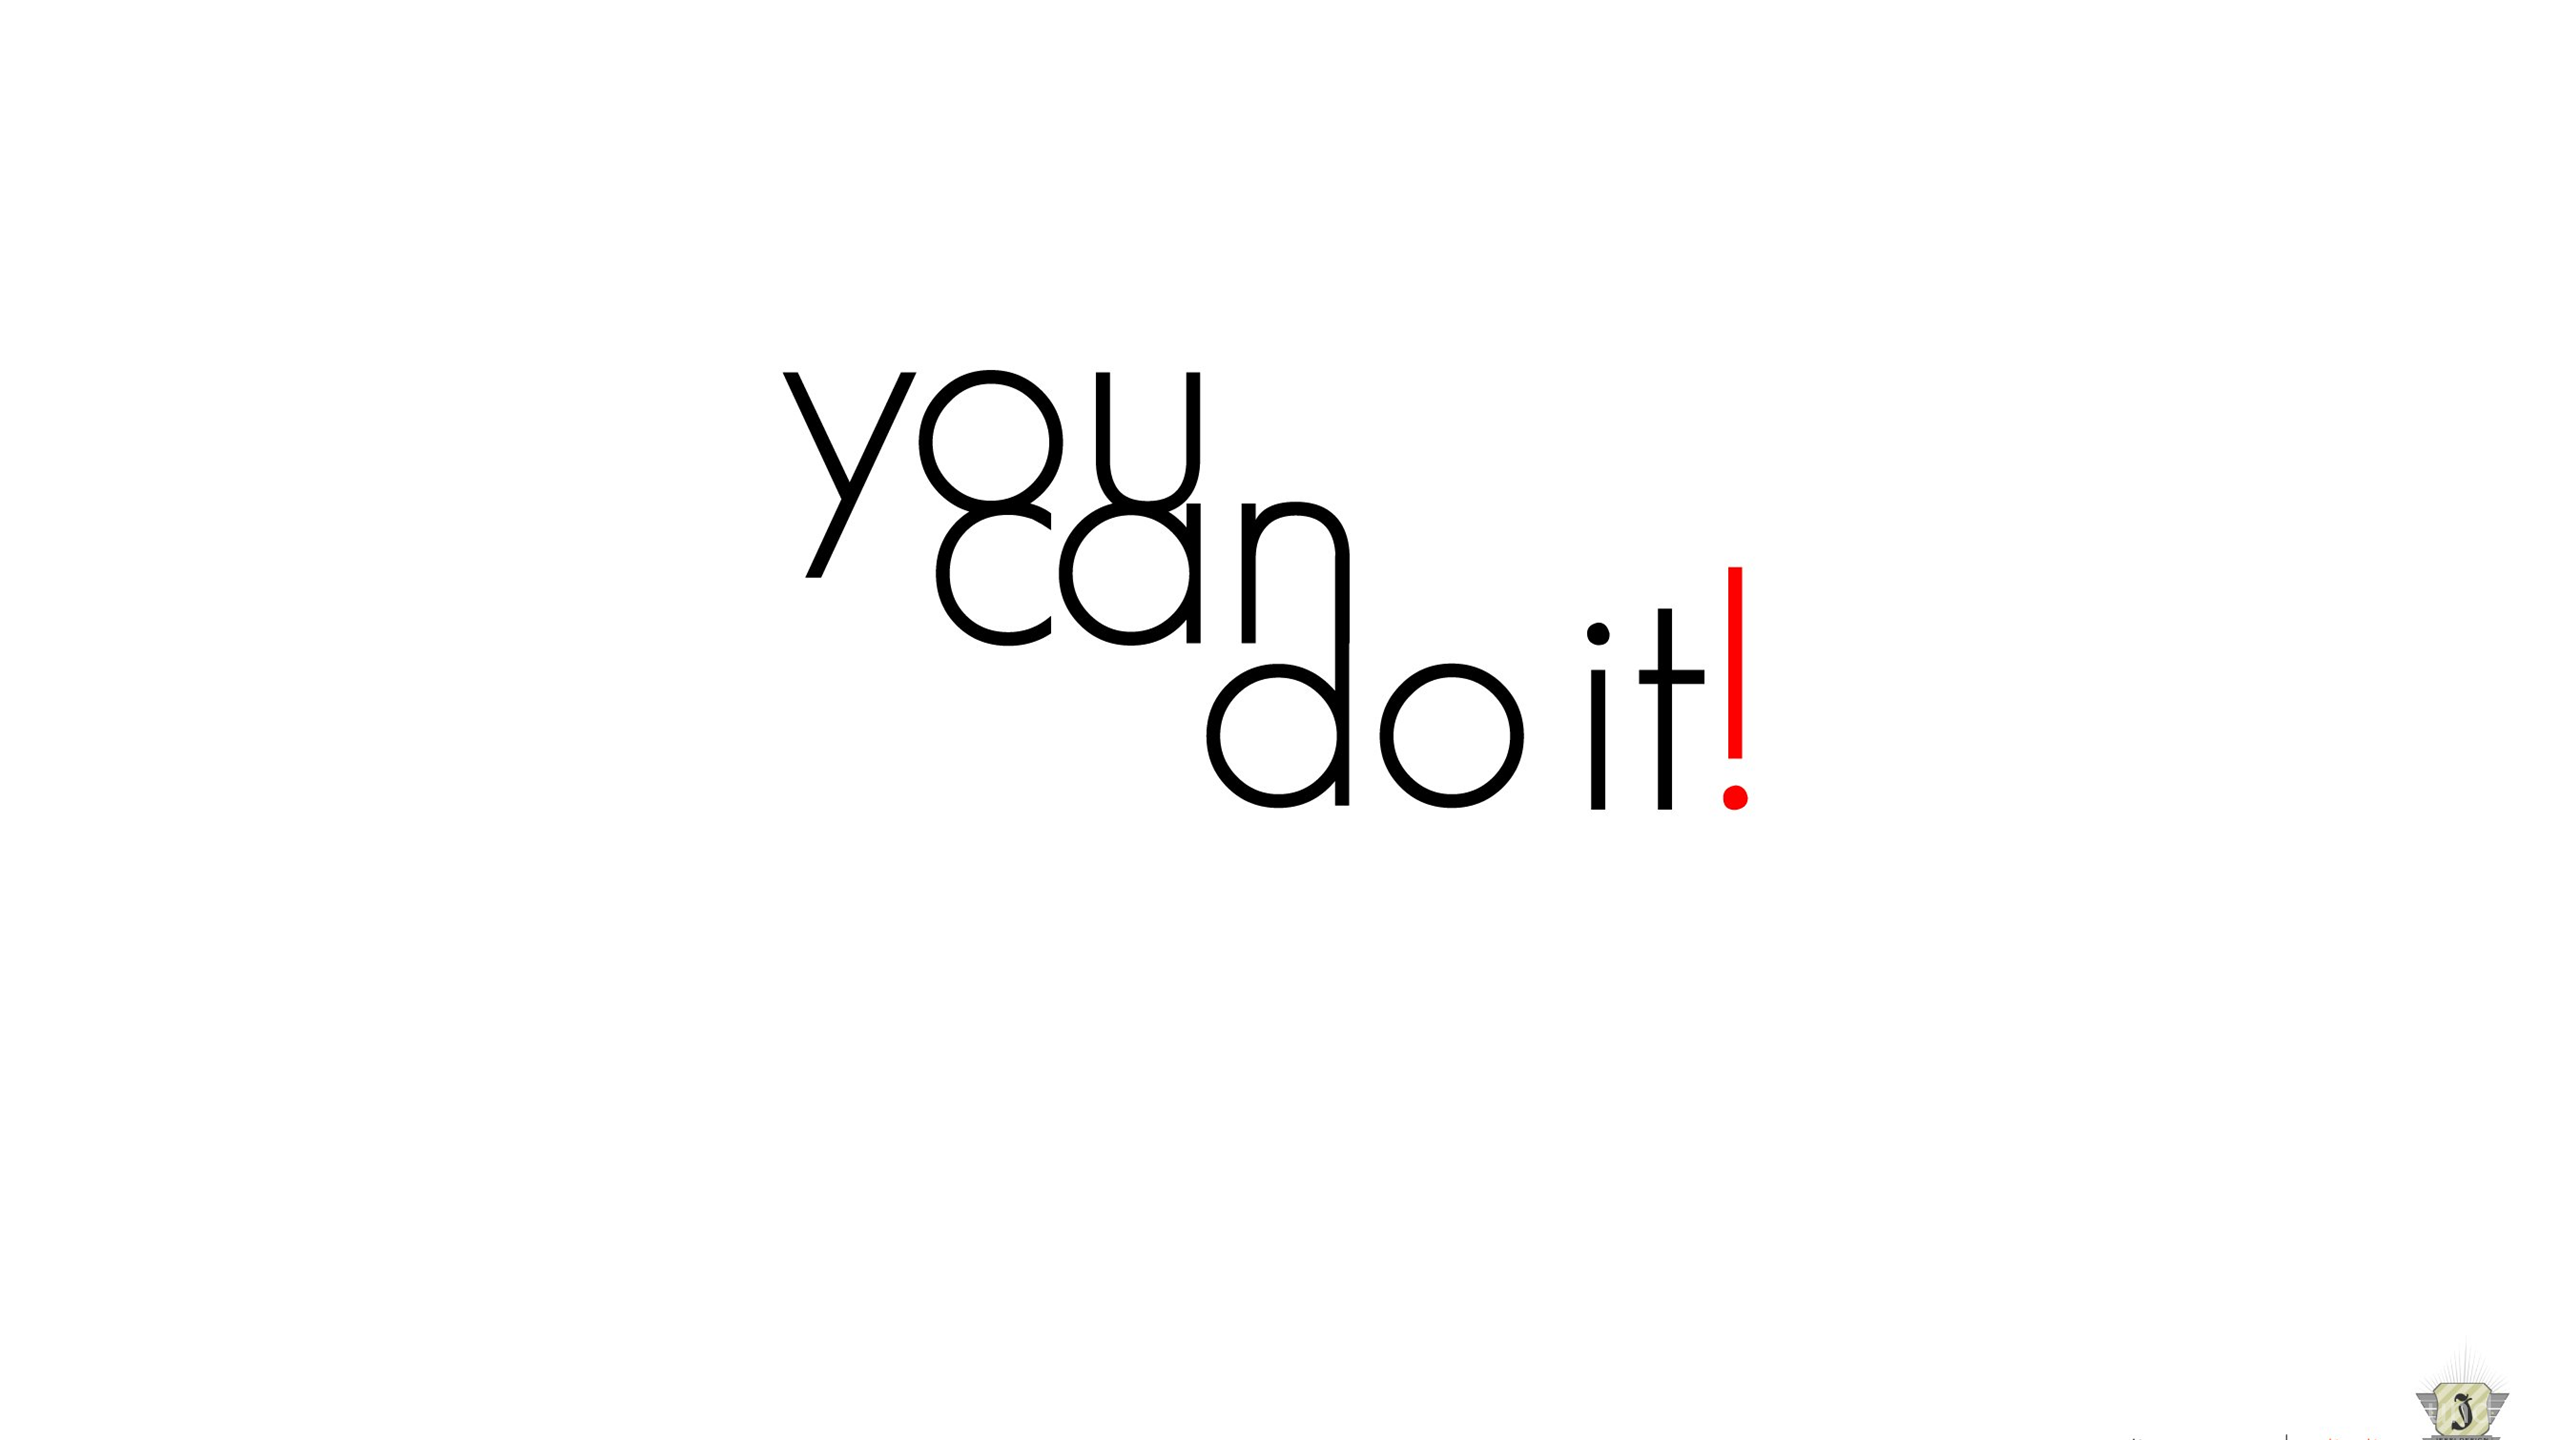 You Can Do This Wallpapers